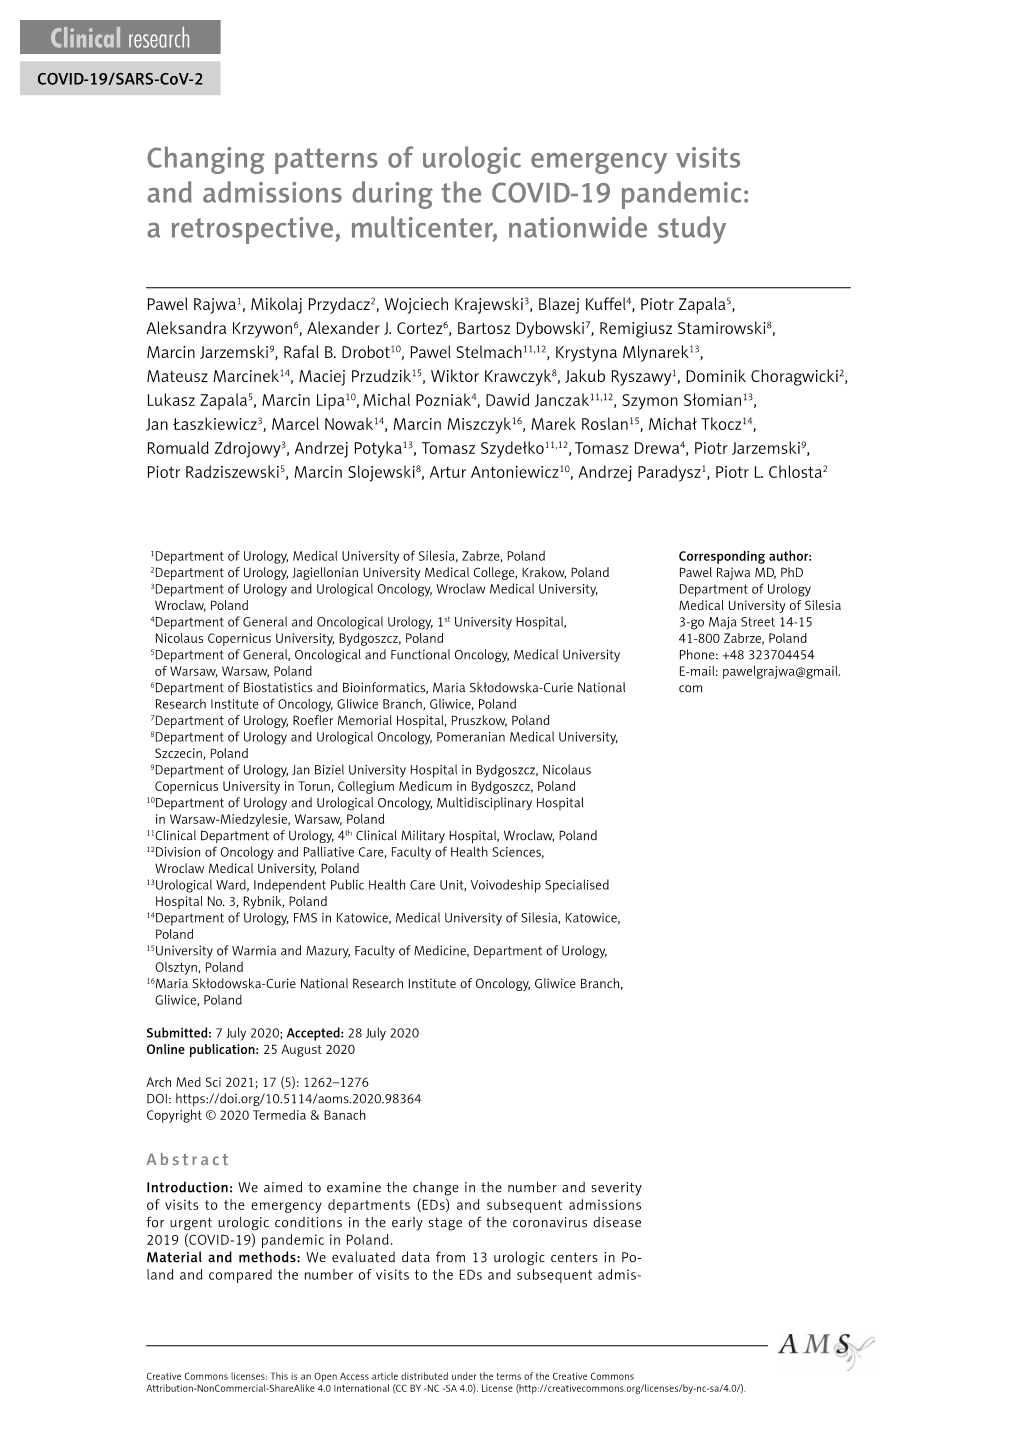 Changing Patterns of Urologic Emergency Visits and Admissions During the COVID-19 Pandemic: a Retrospective, Multicenter, Nationwide Study